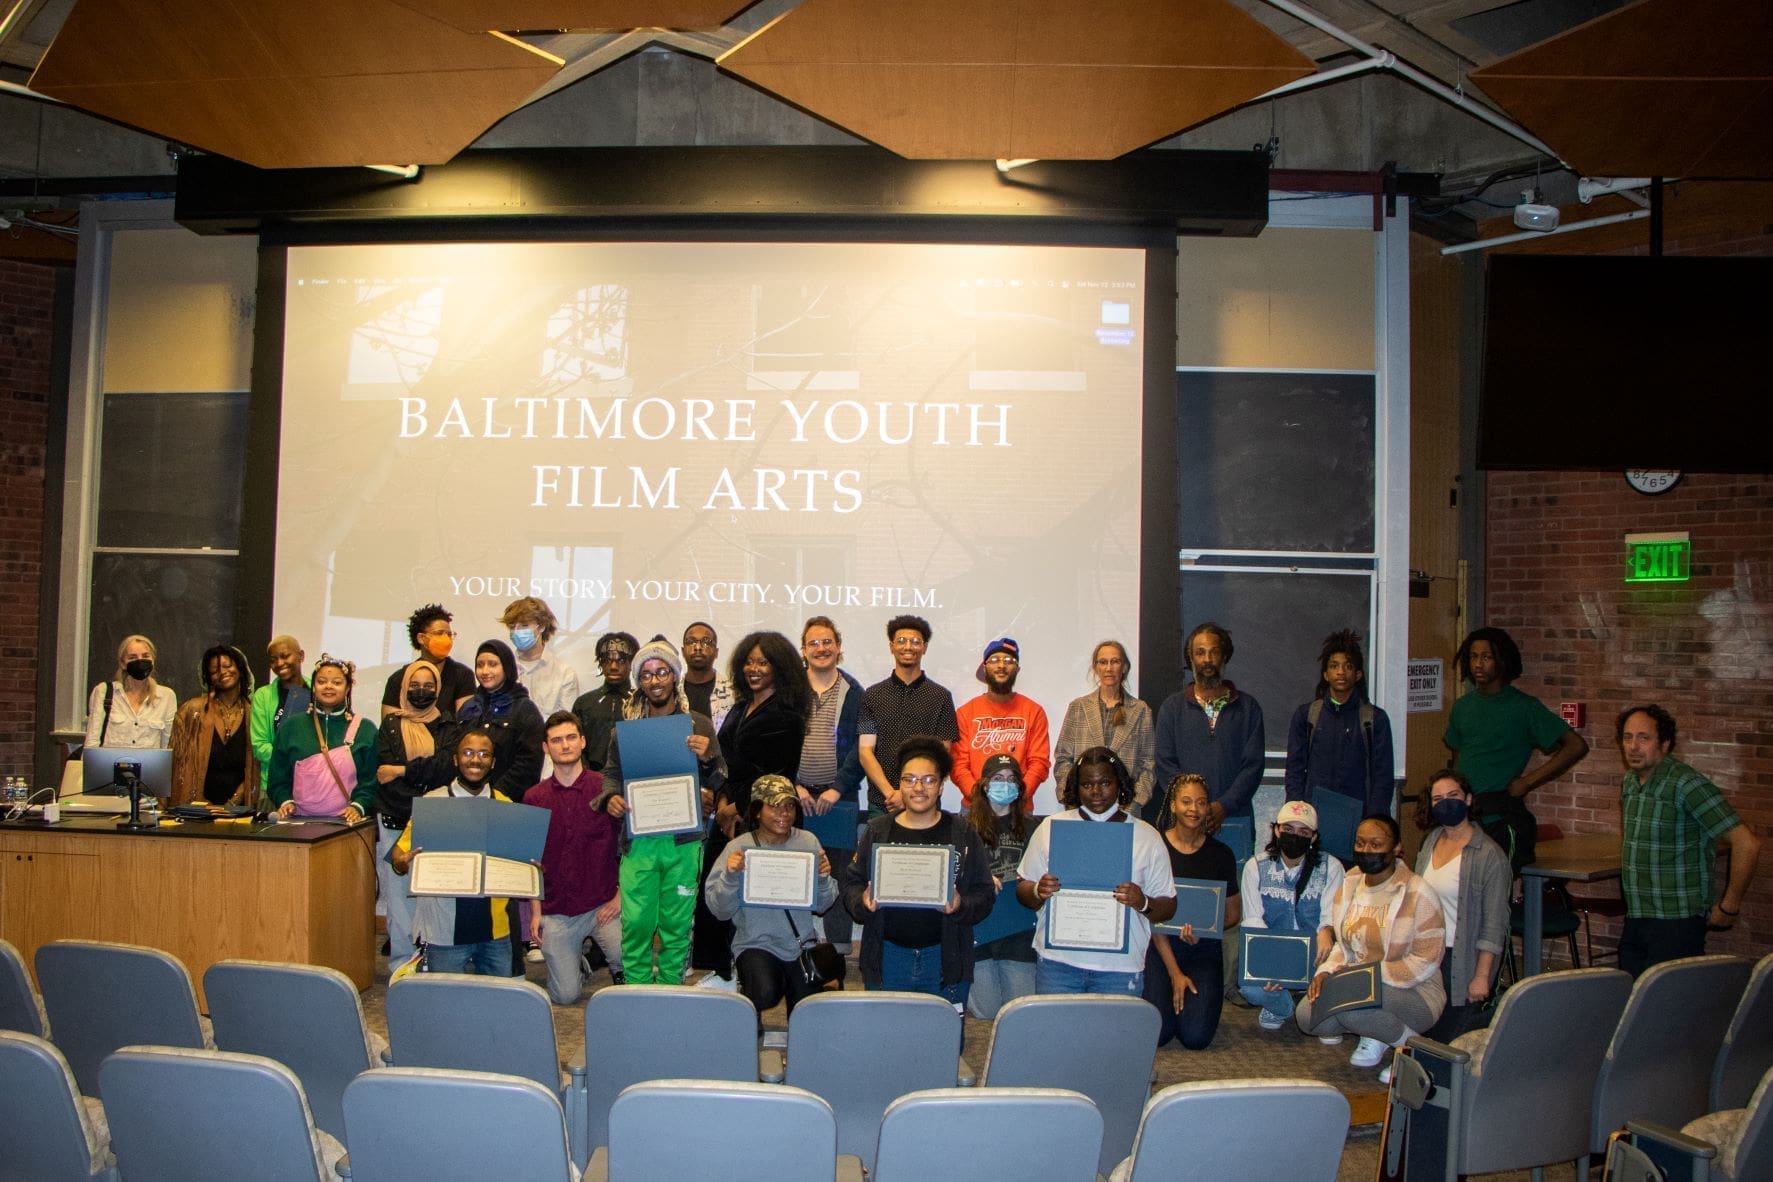 Baltimore Youth Film Arts Celebrates Their Fall Session